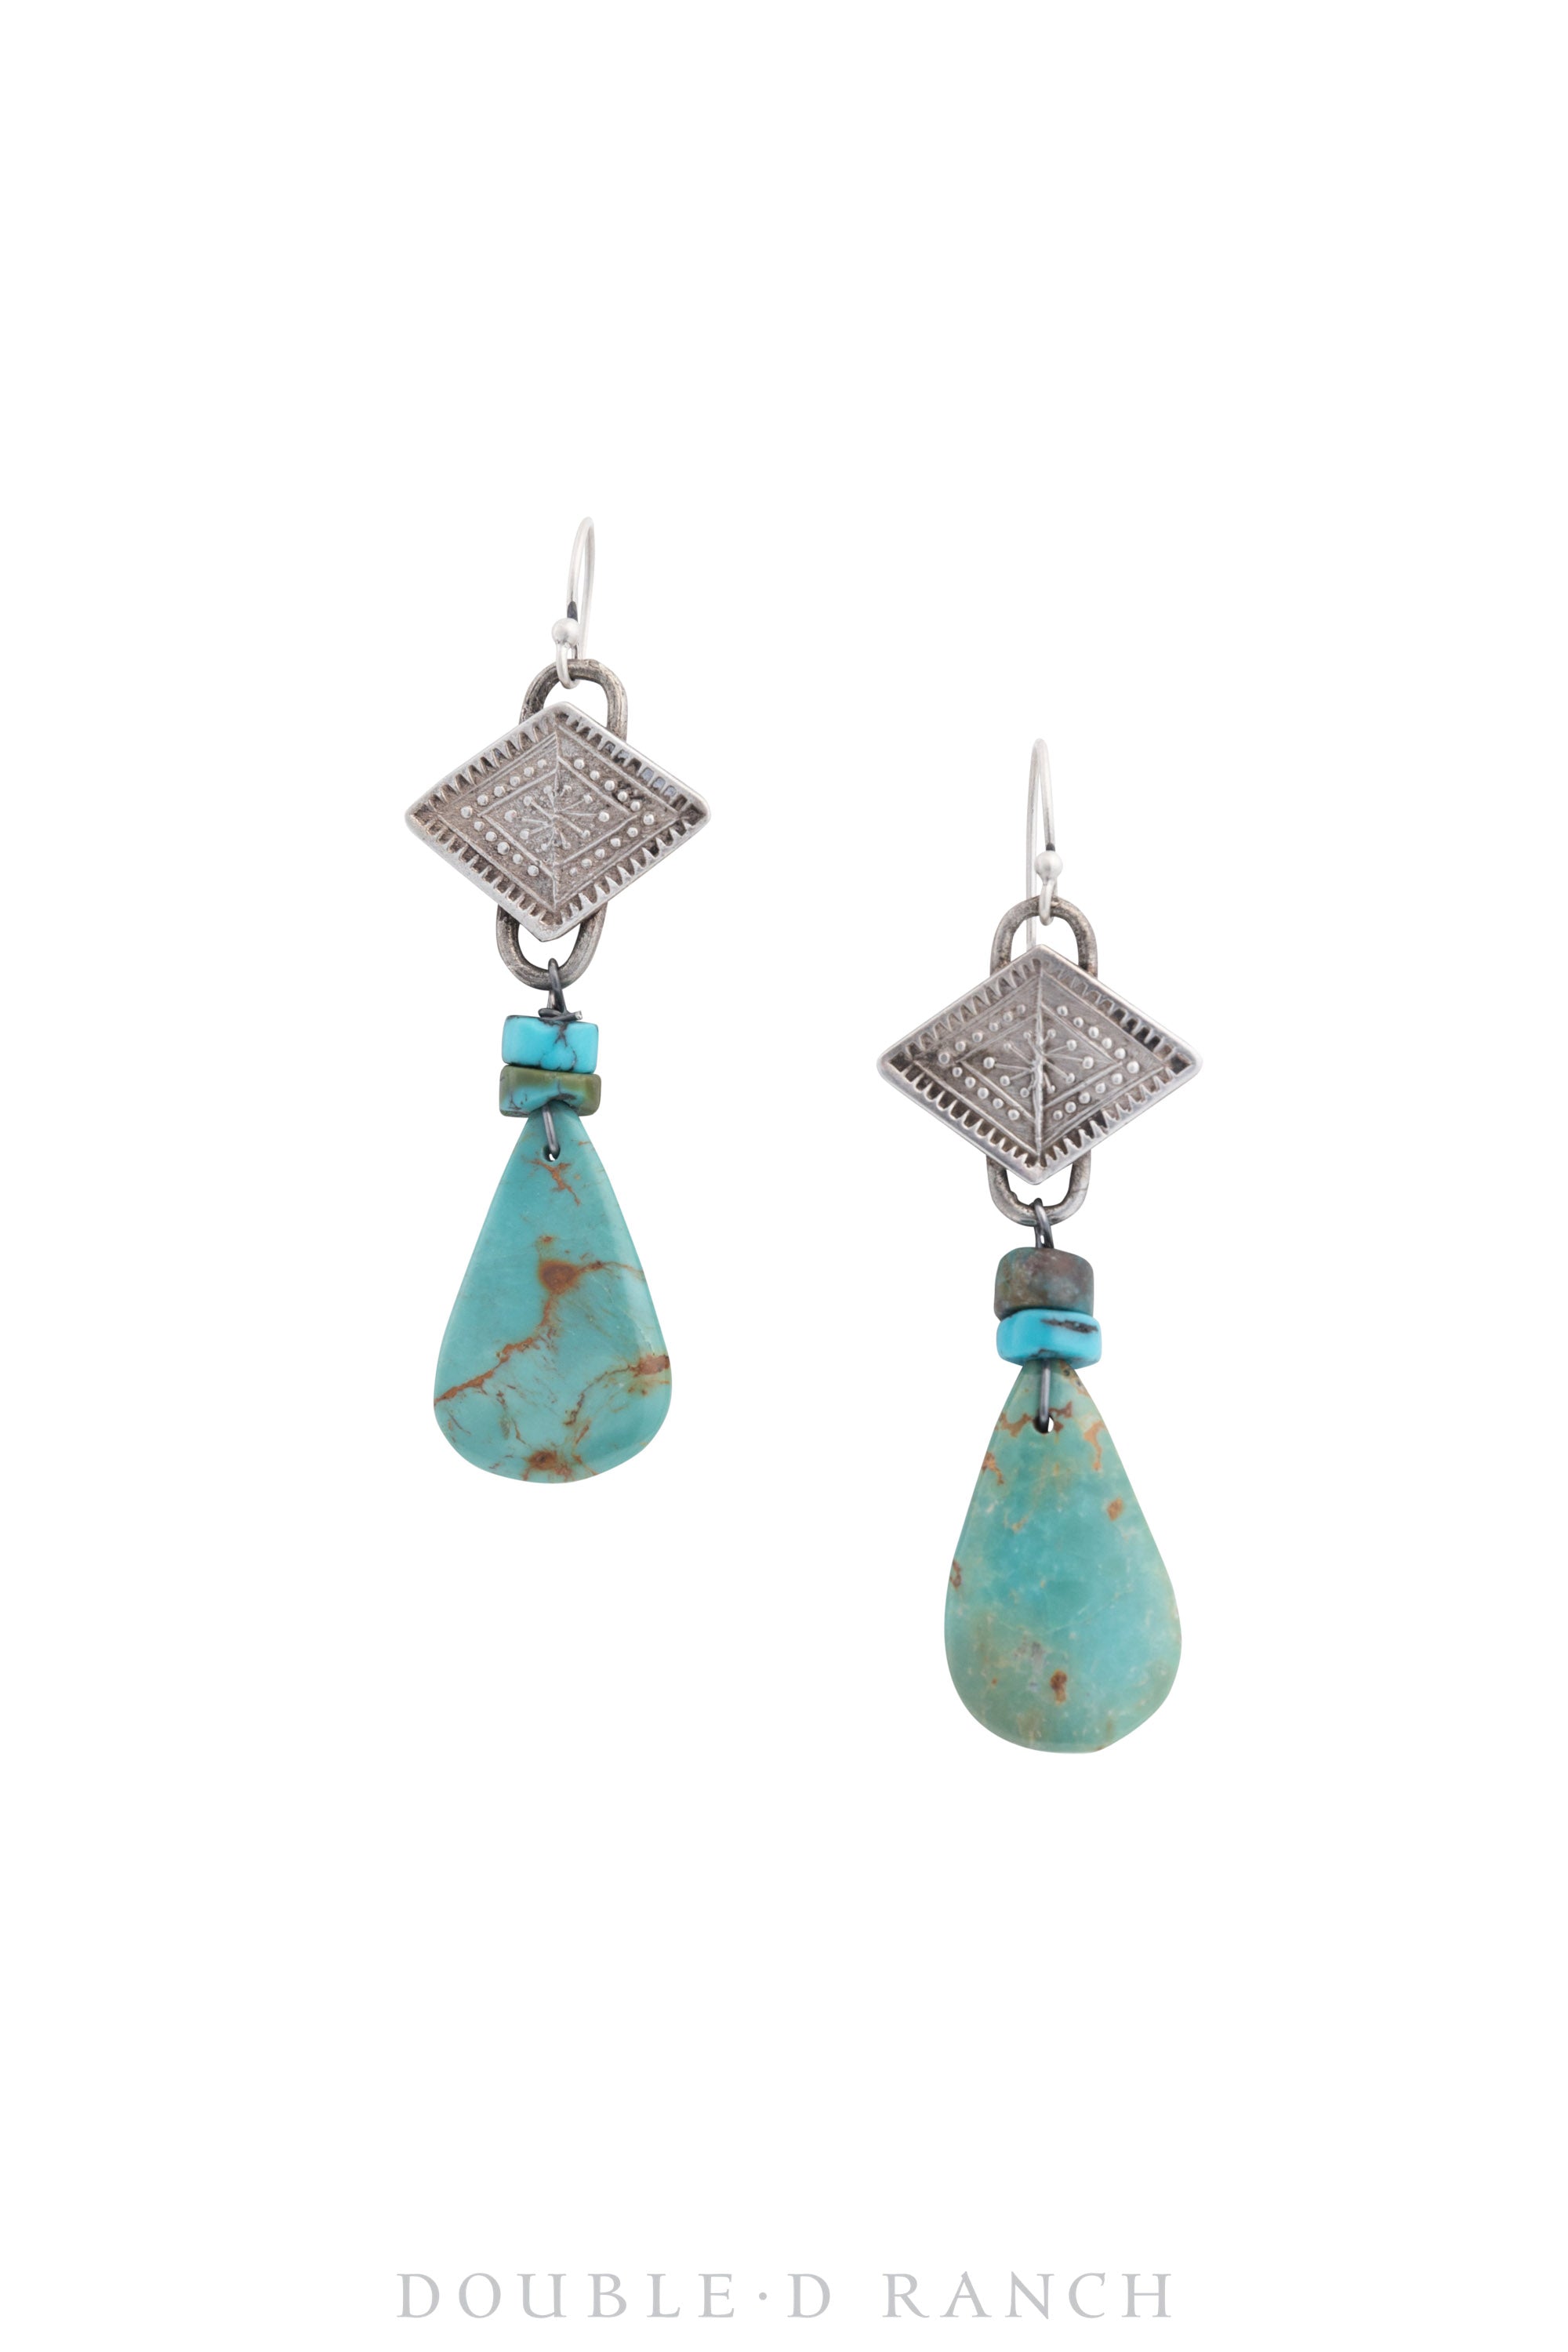 Earrings, Repurposed, Concho, Sterling Silver & Turquoise, 1475